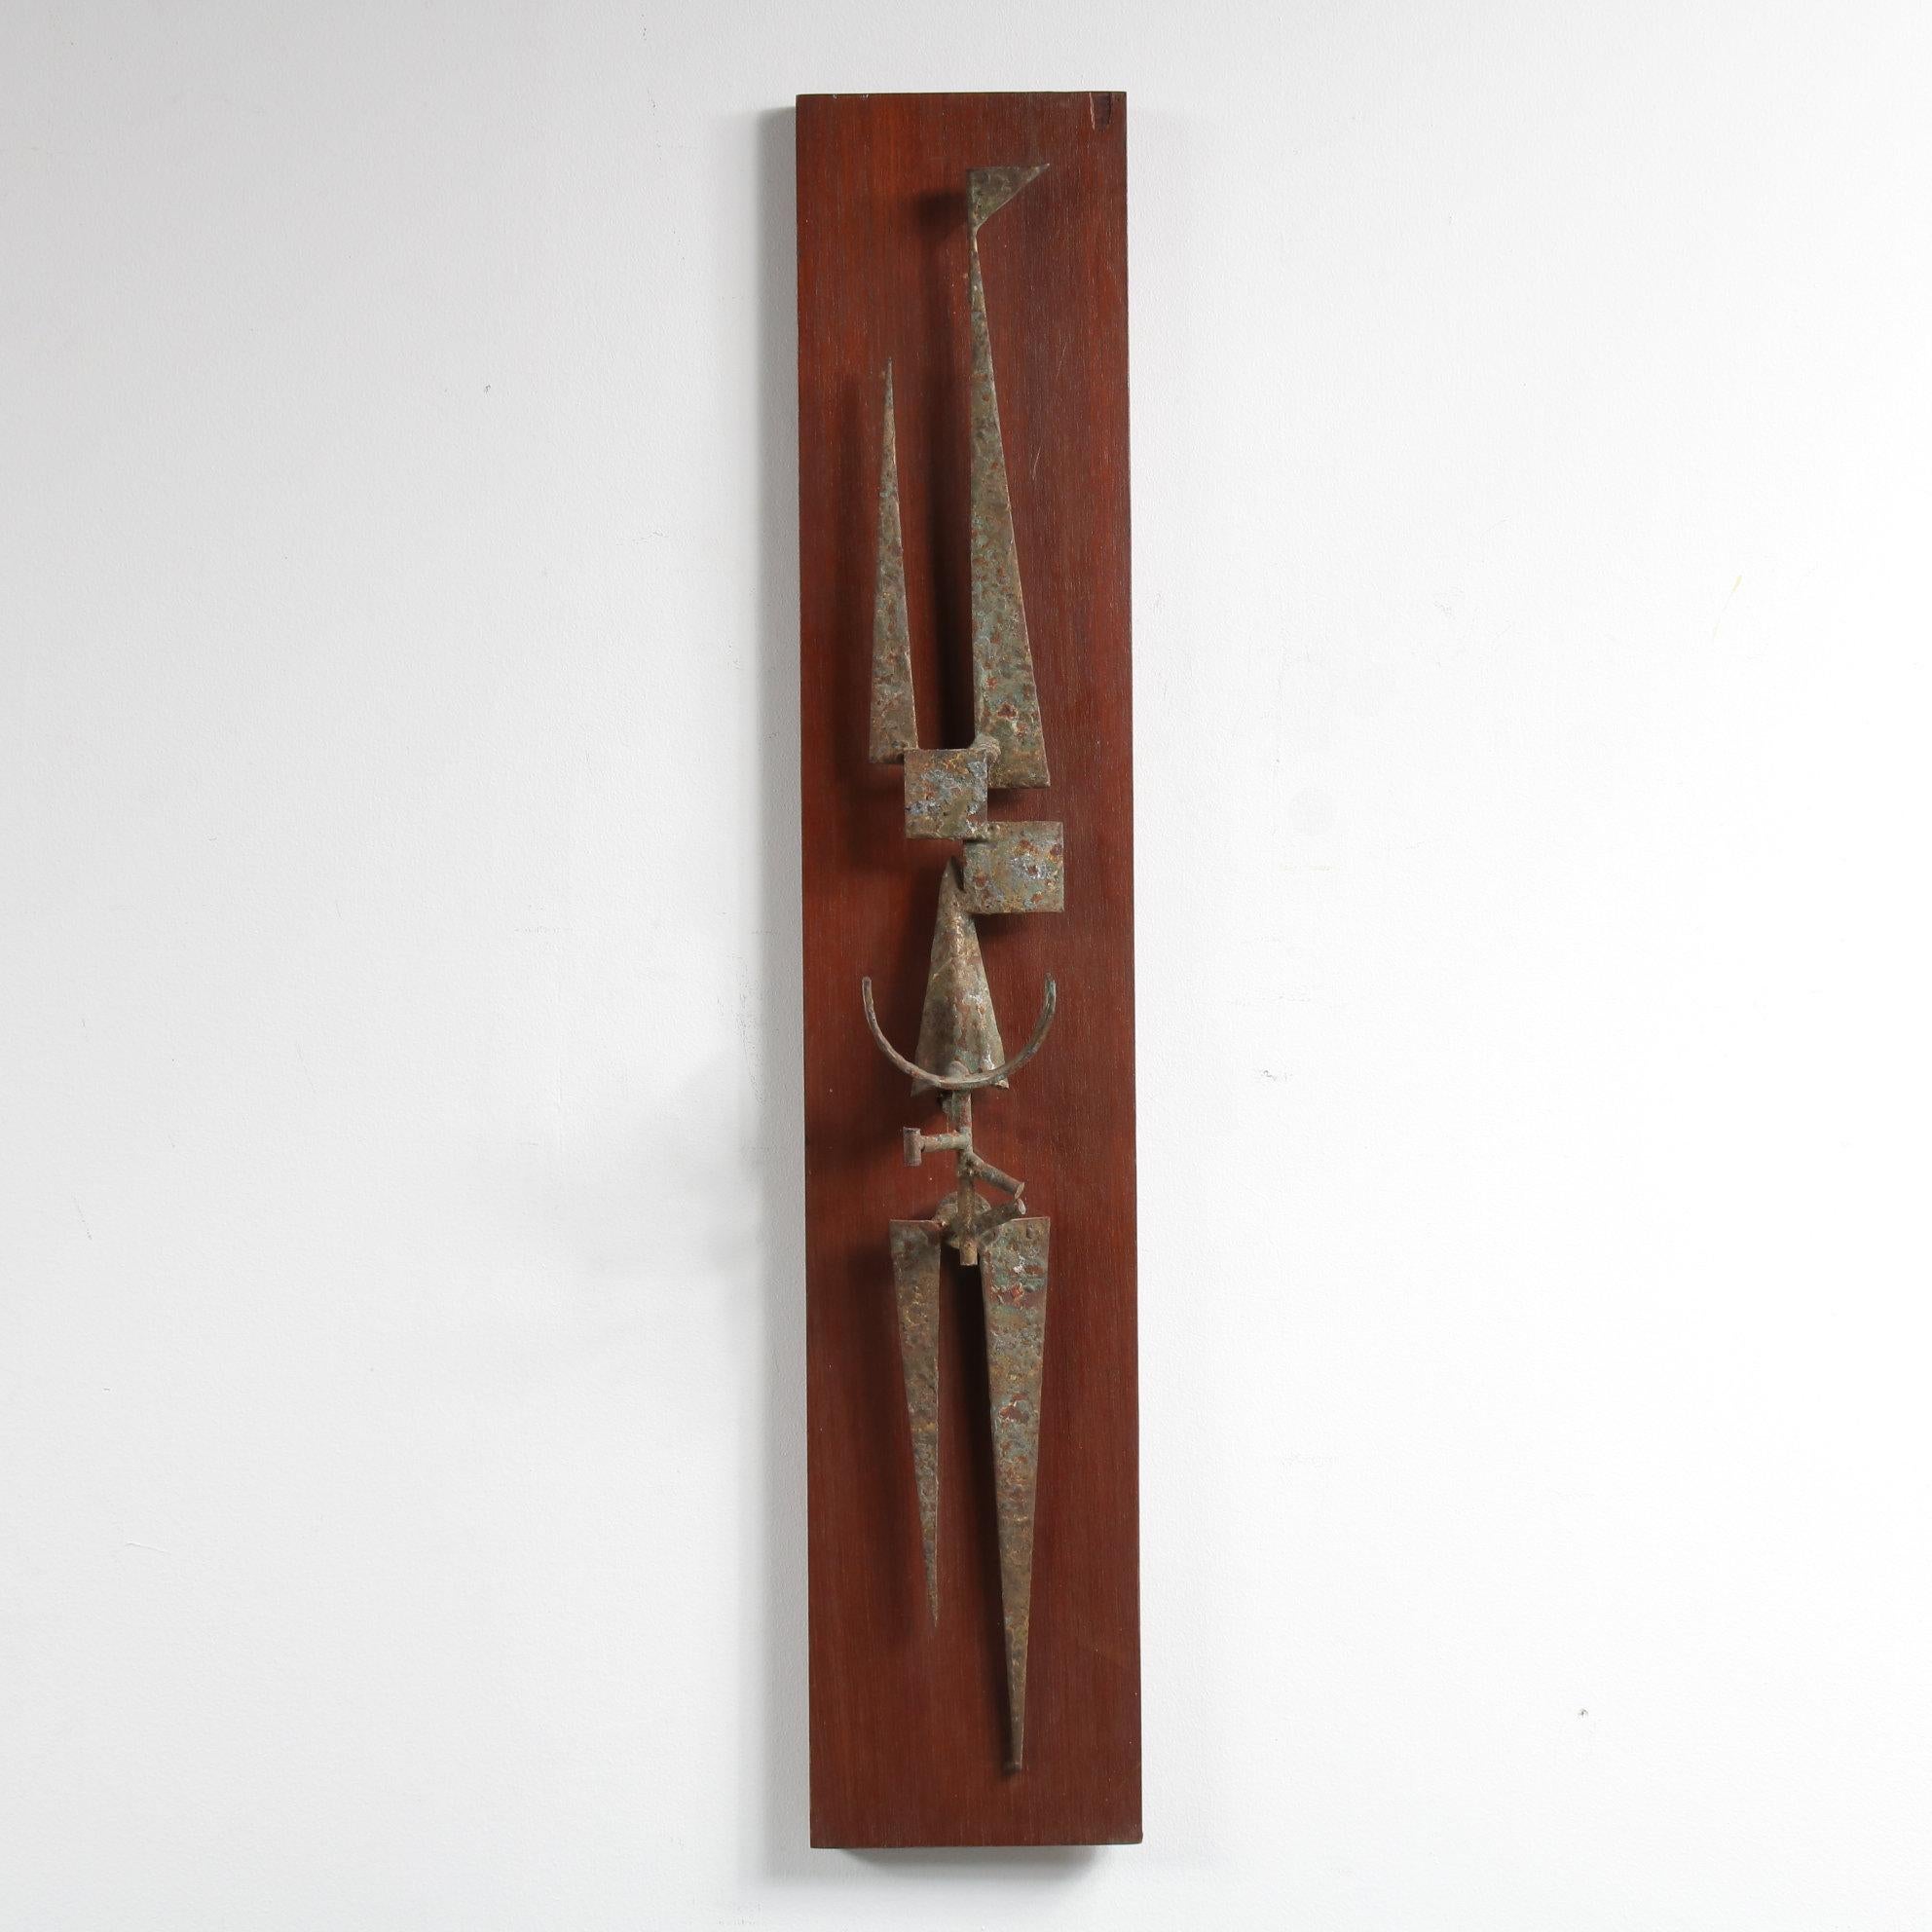 A beautiful Brutalist style wall sculpture made by Walter de Buck in Belgium, circa 1960.

Made of high quality bronze patinated metal on a wooden panel. The metal sculpture is made in the iconic style by De Buck. The combination of materials make